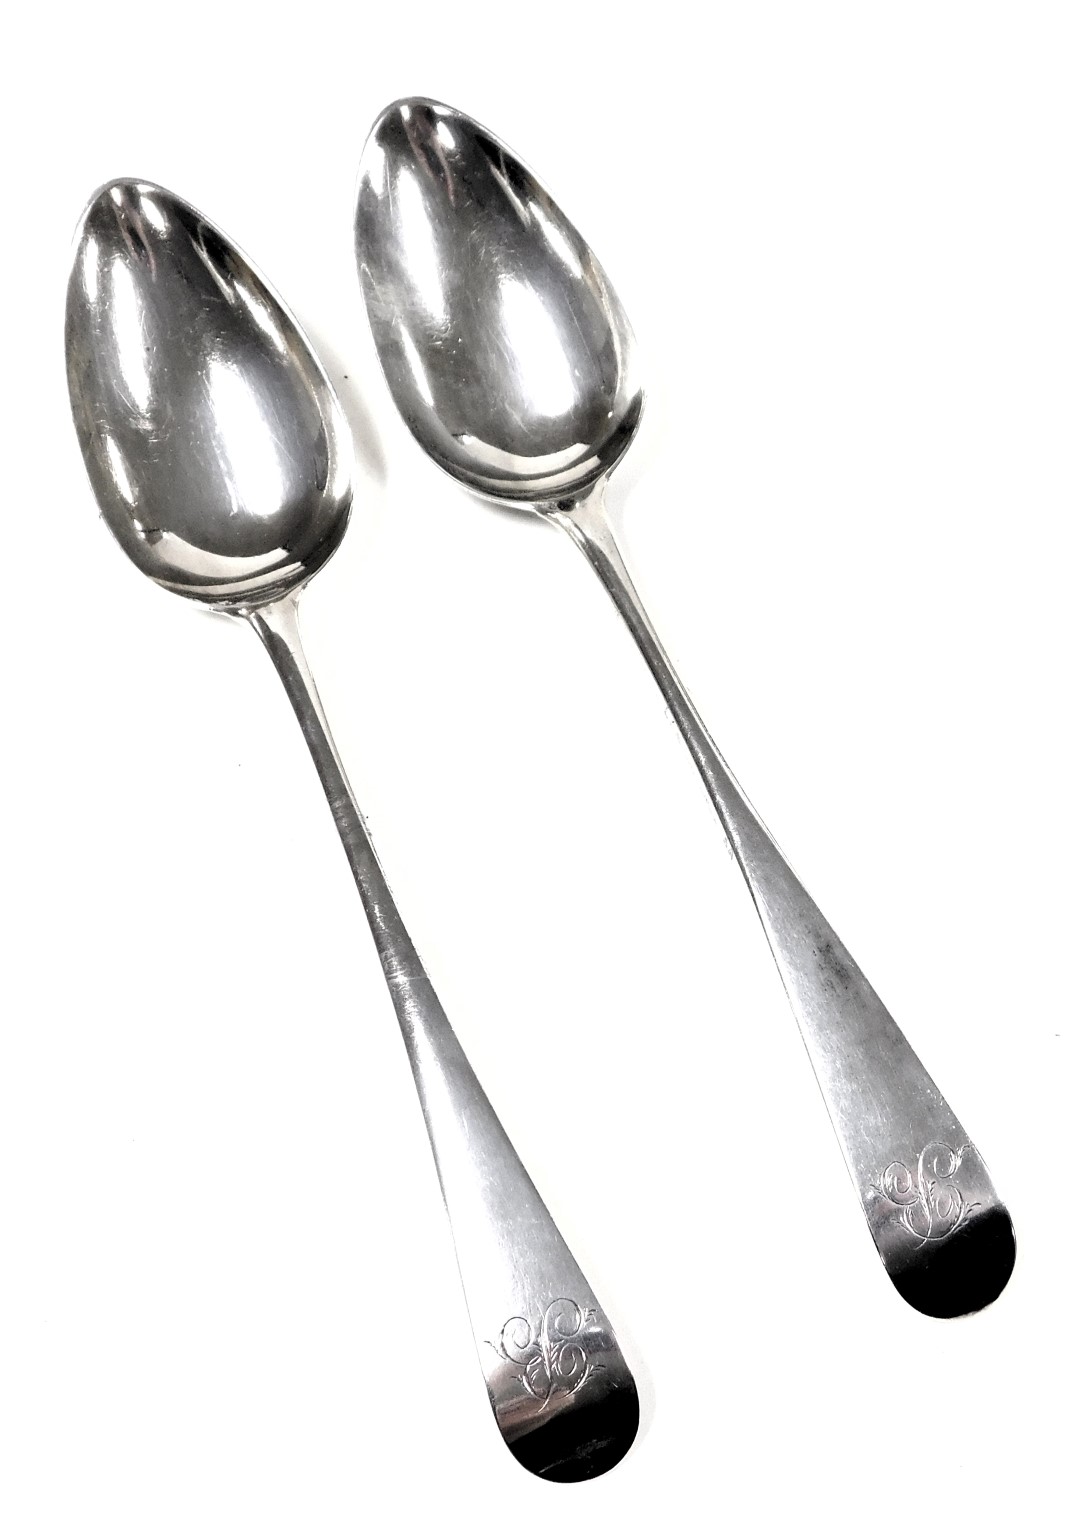 A pair of George III silver Old English pattern tablespoons, initial engraved, Hester Bateman, Londo